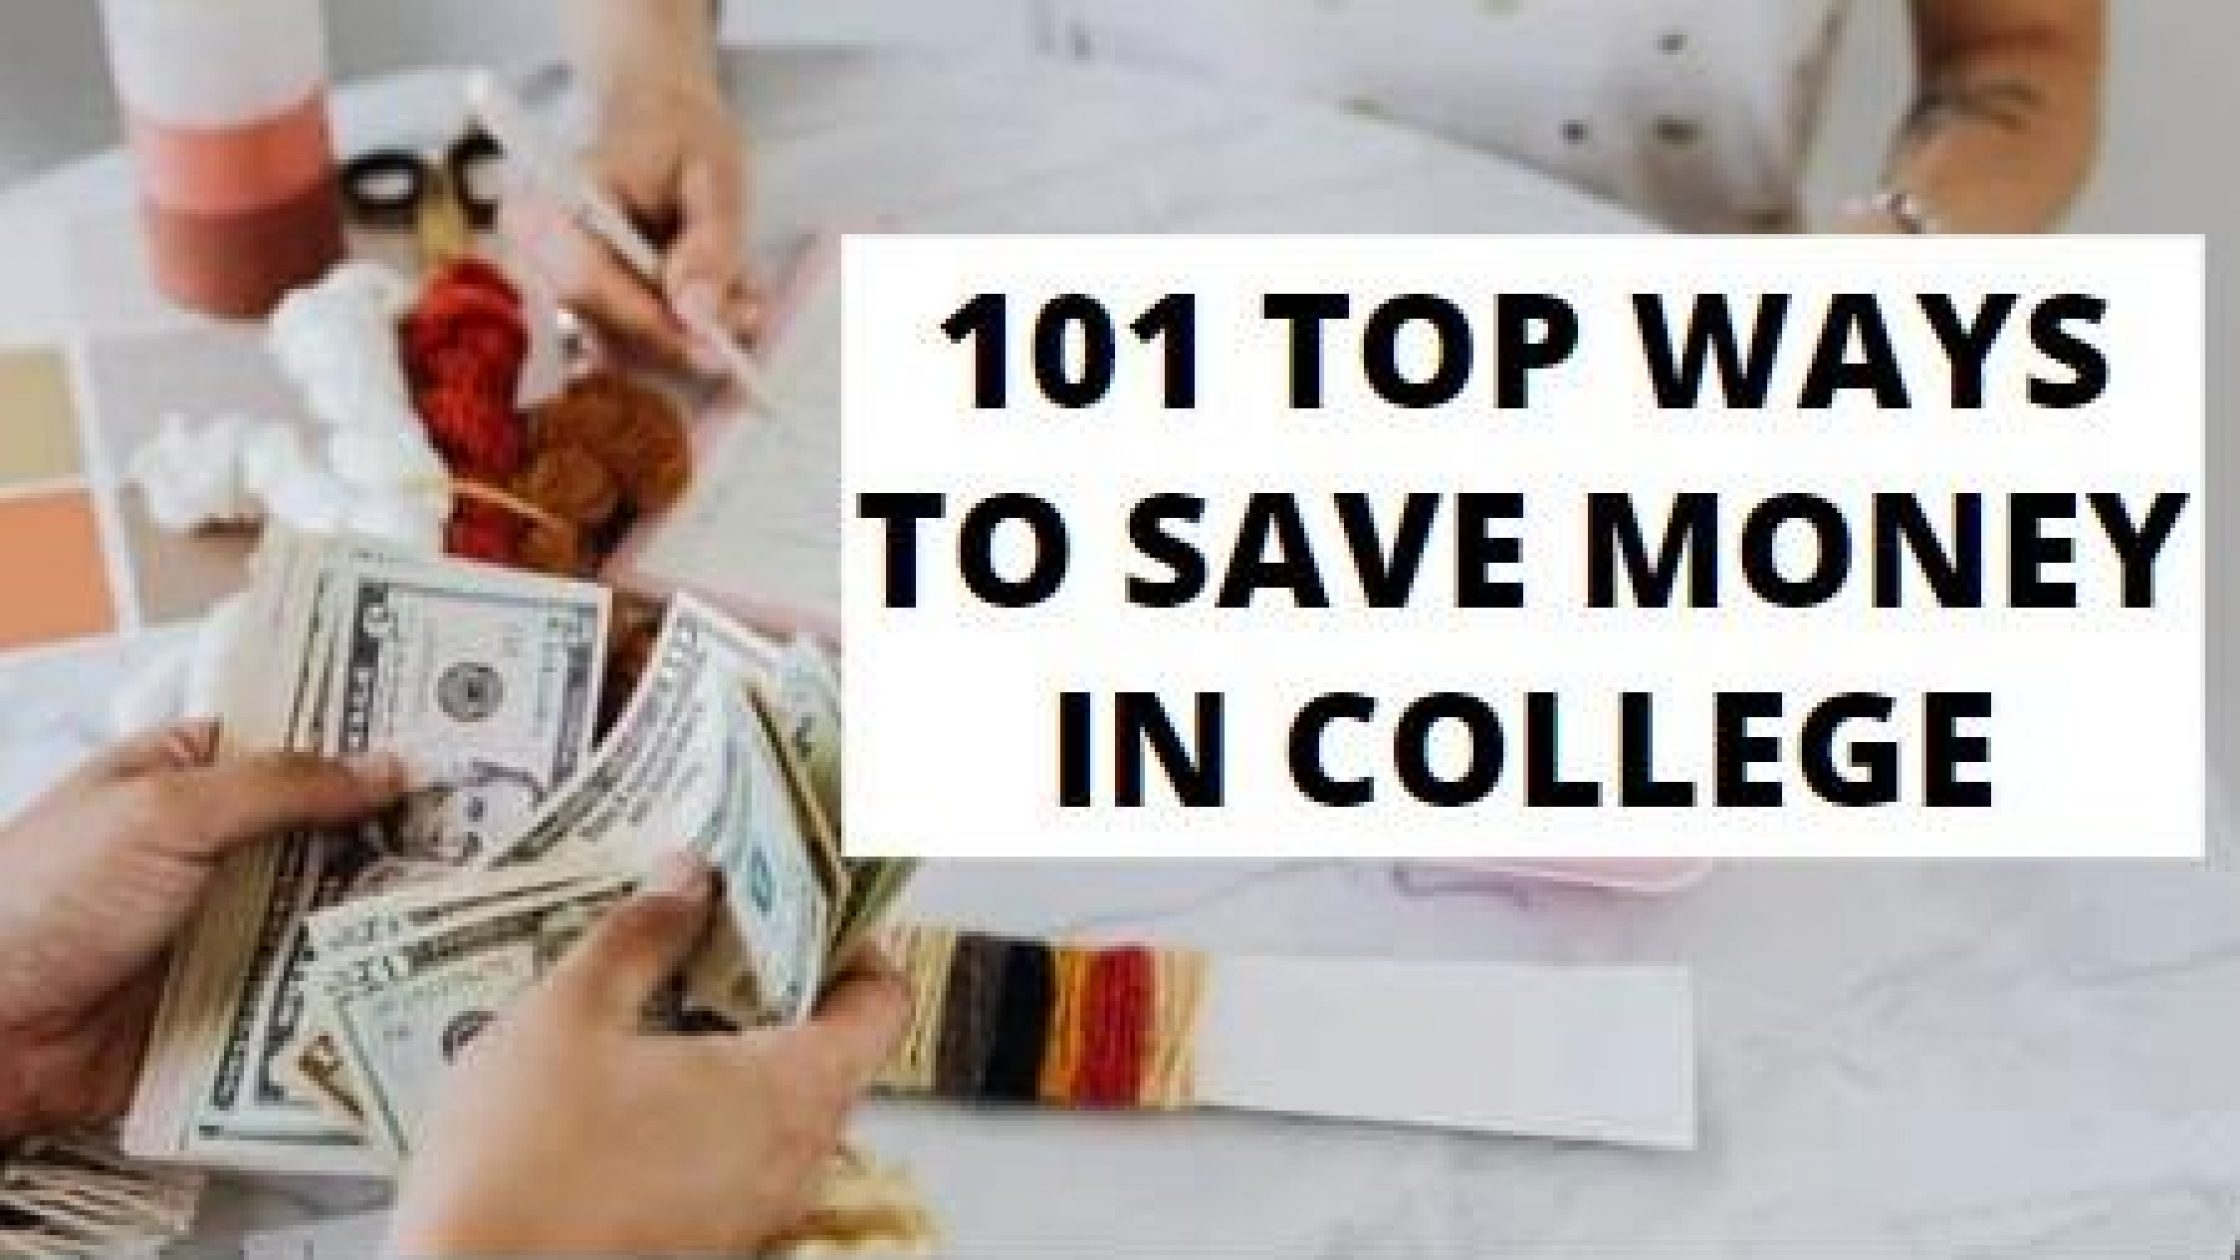 101 Top Ways to Save Money in College